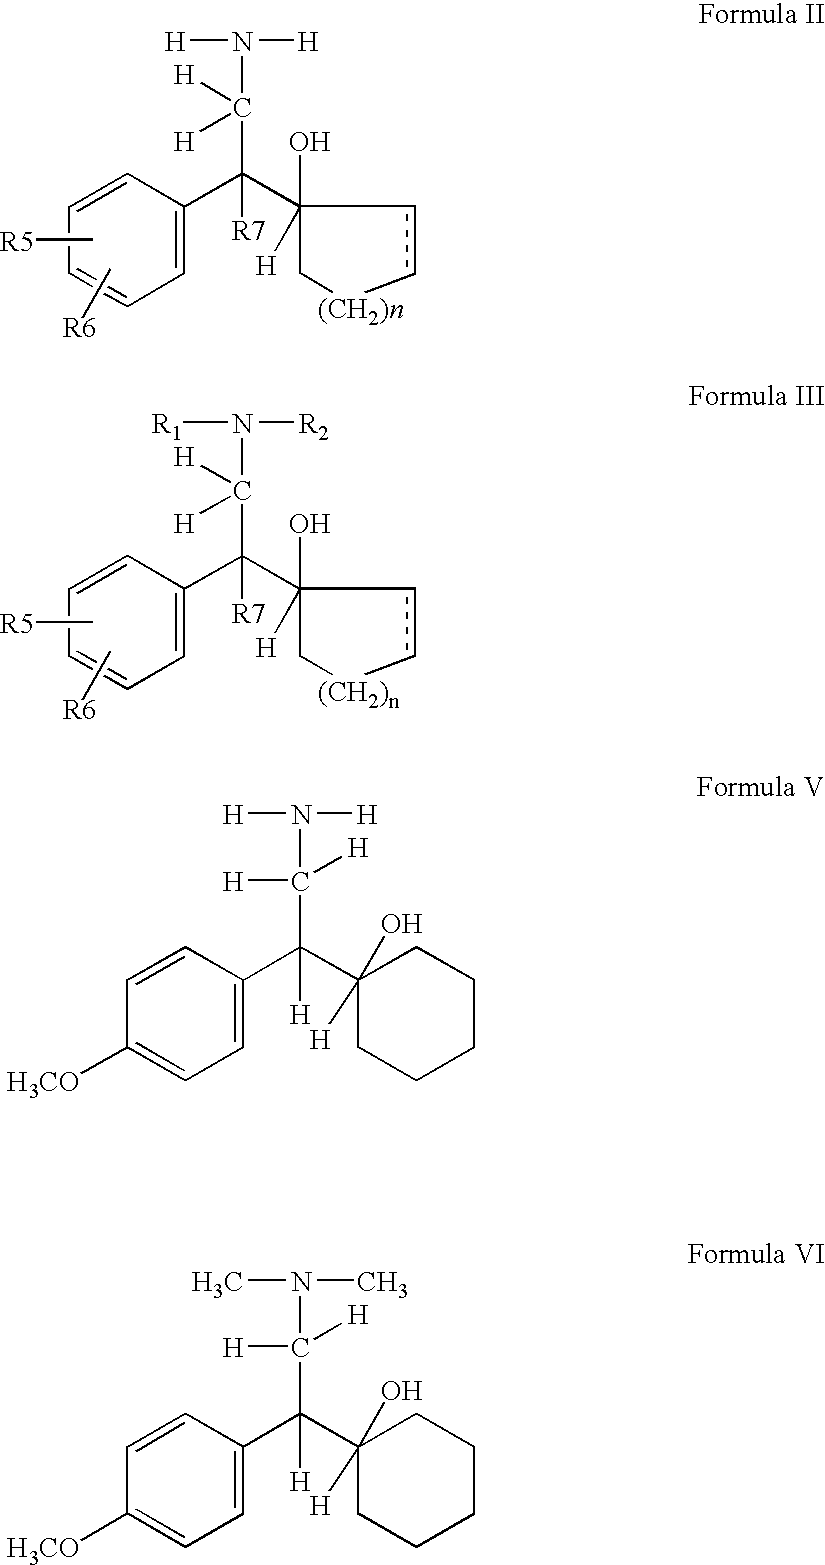 Manufacture of phenyl ethylamine compounds, in particular venlafaxine